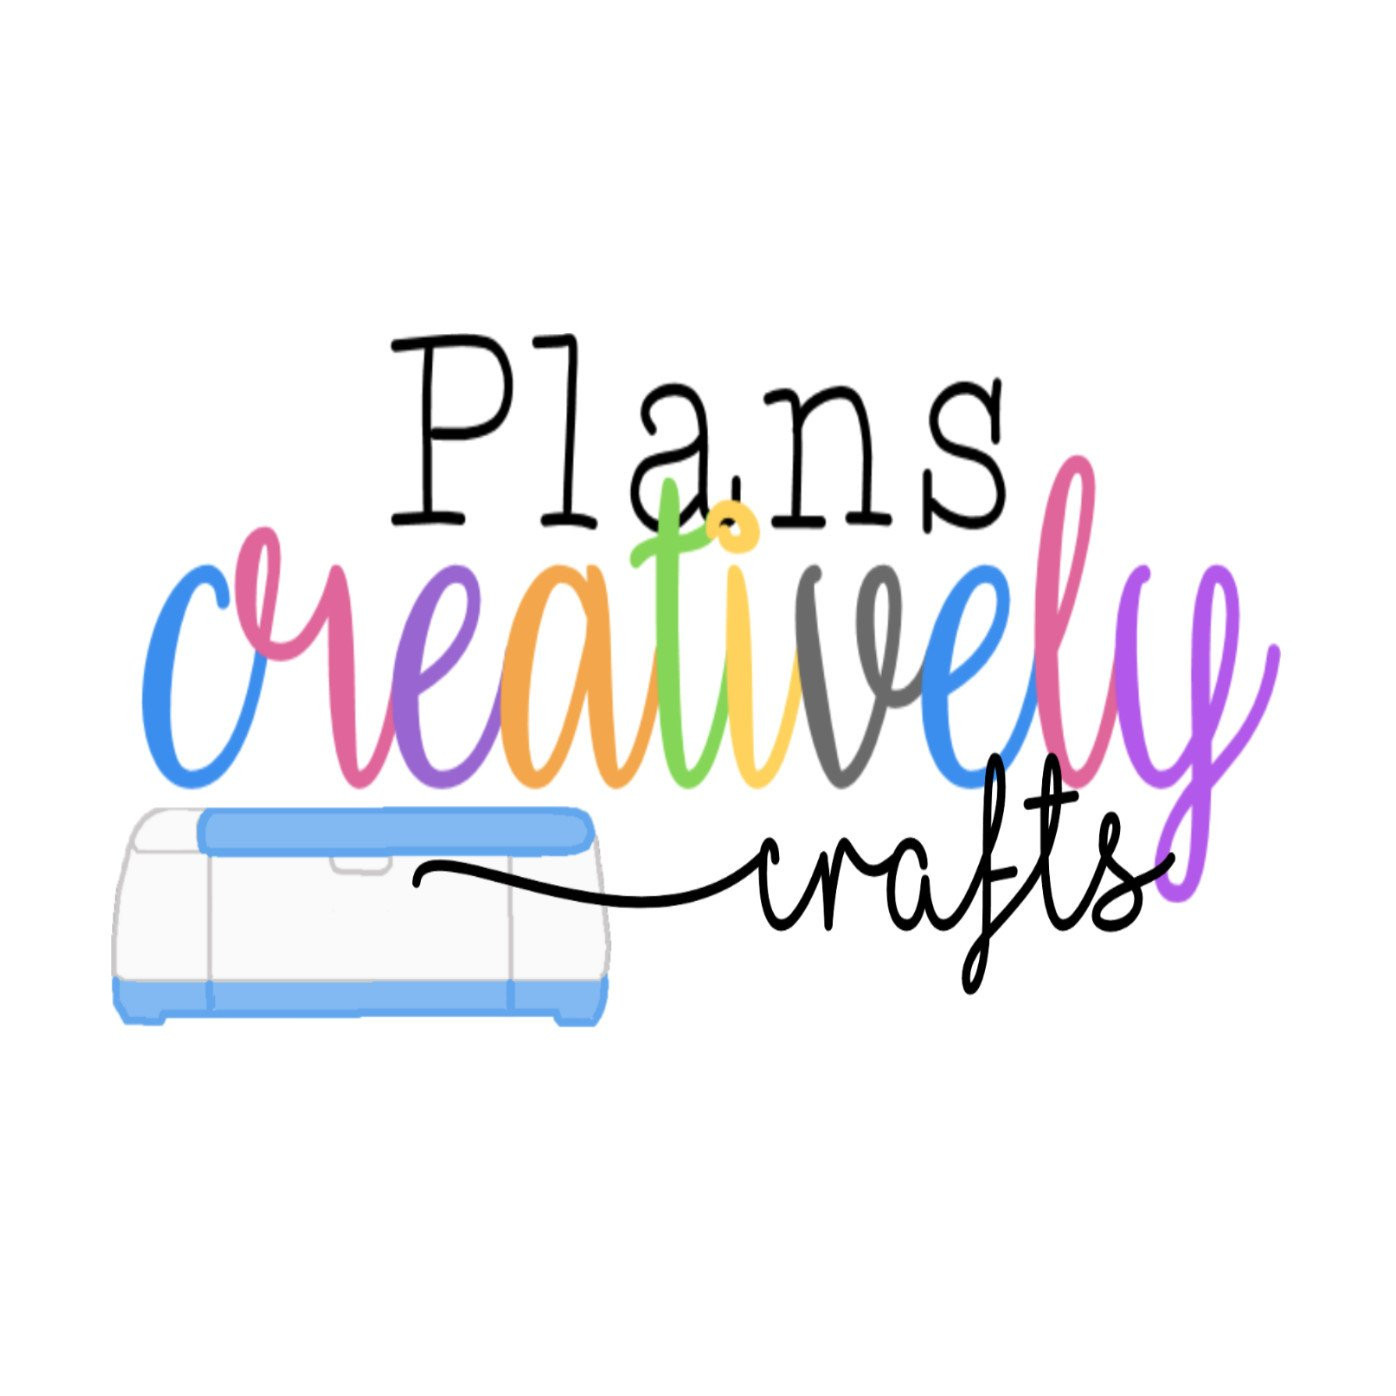 Plans Creatively Crafts's profile picture